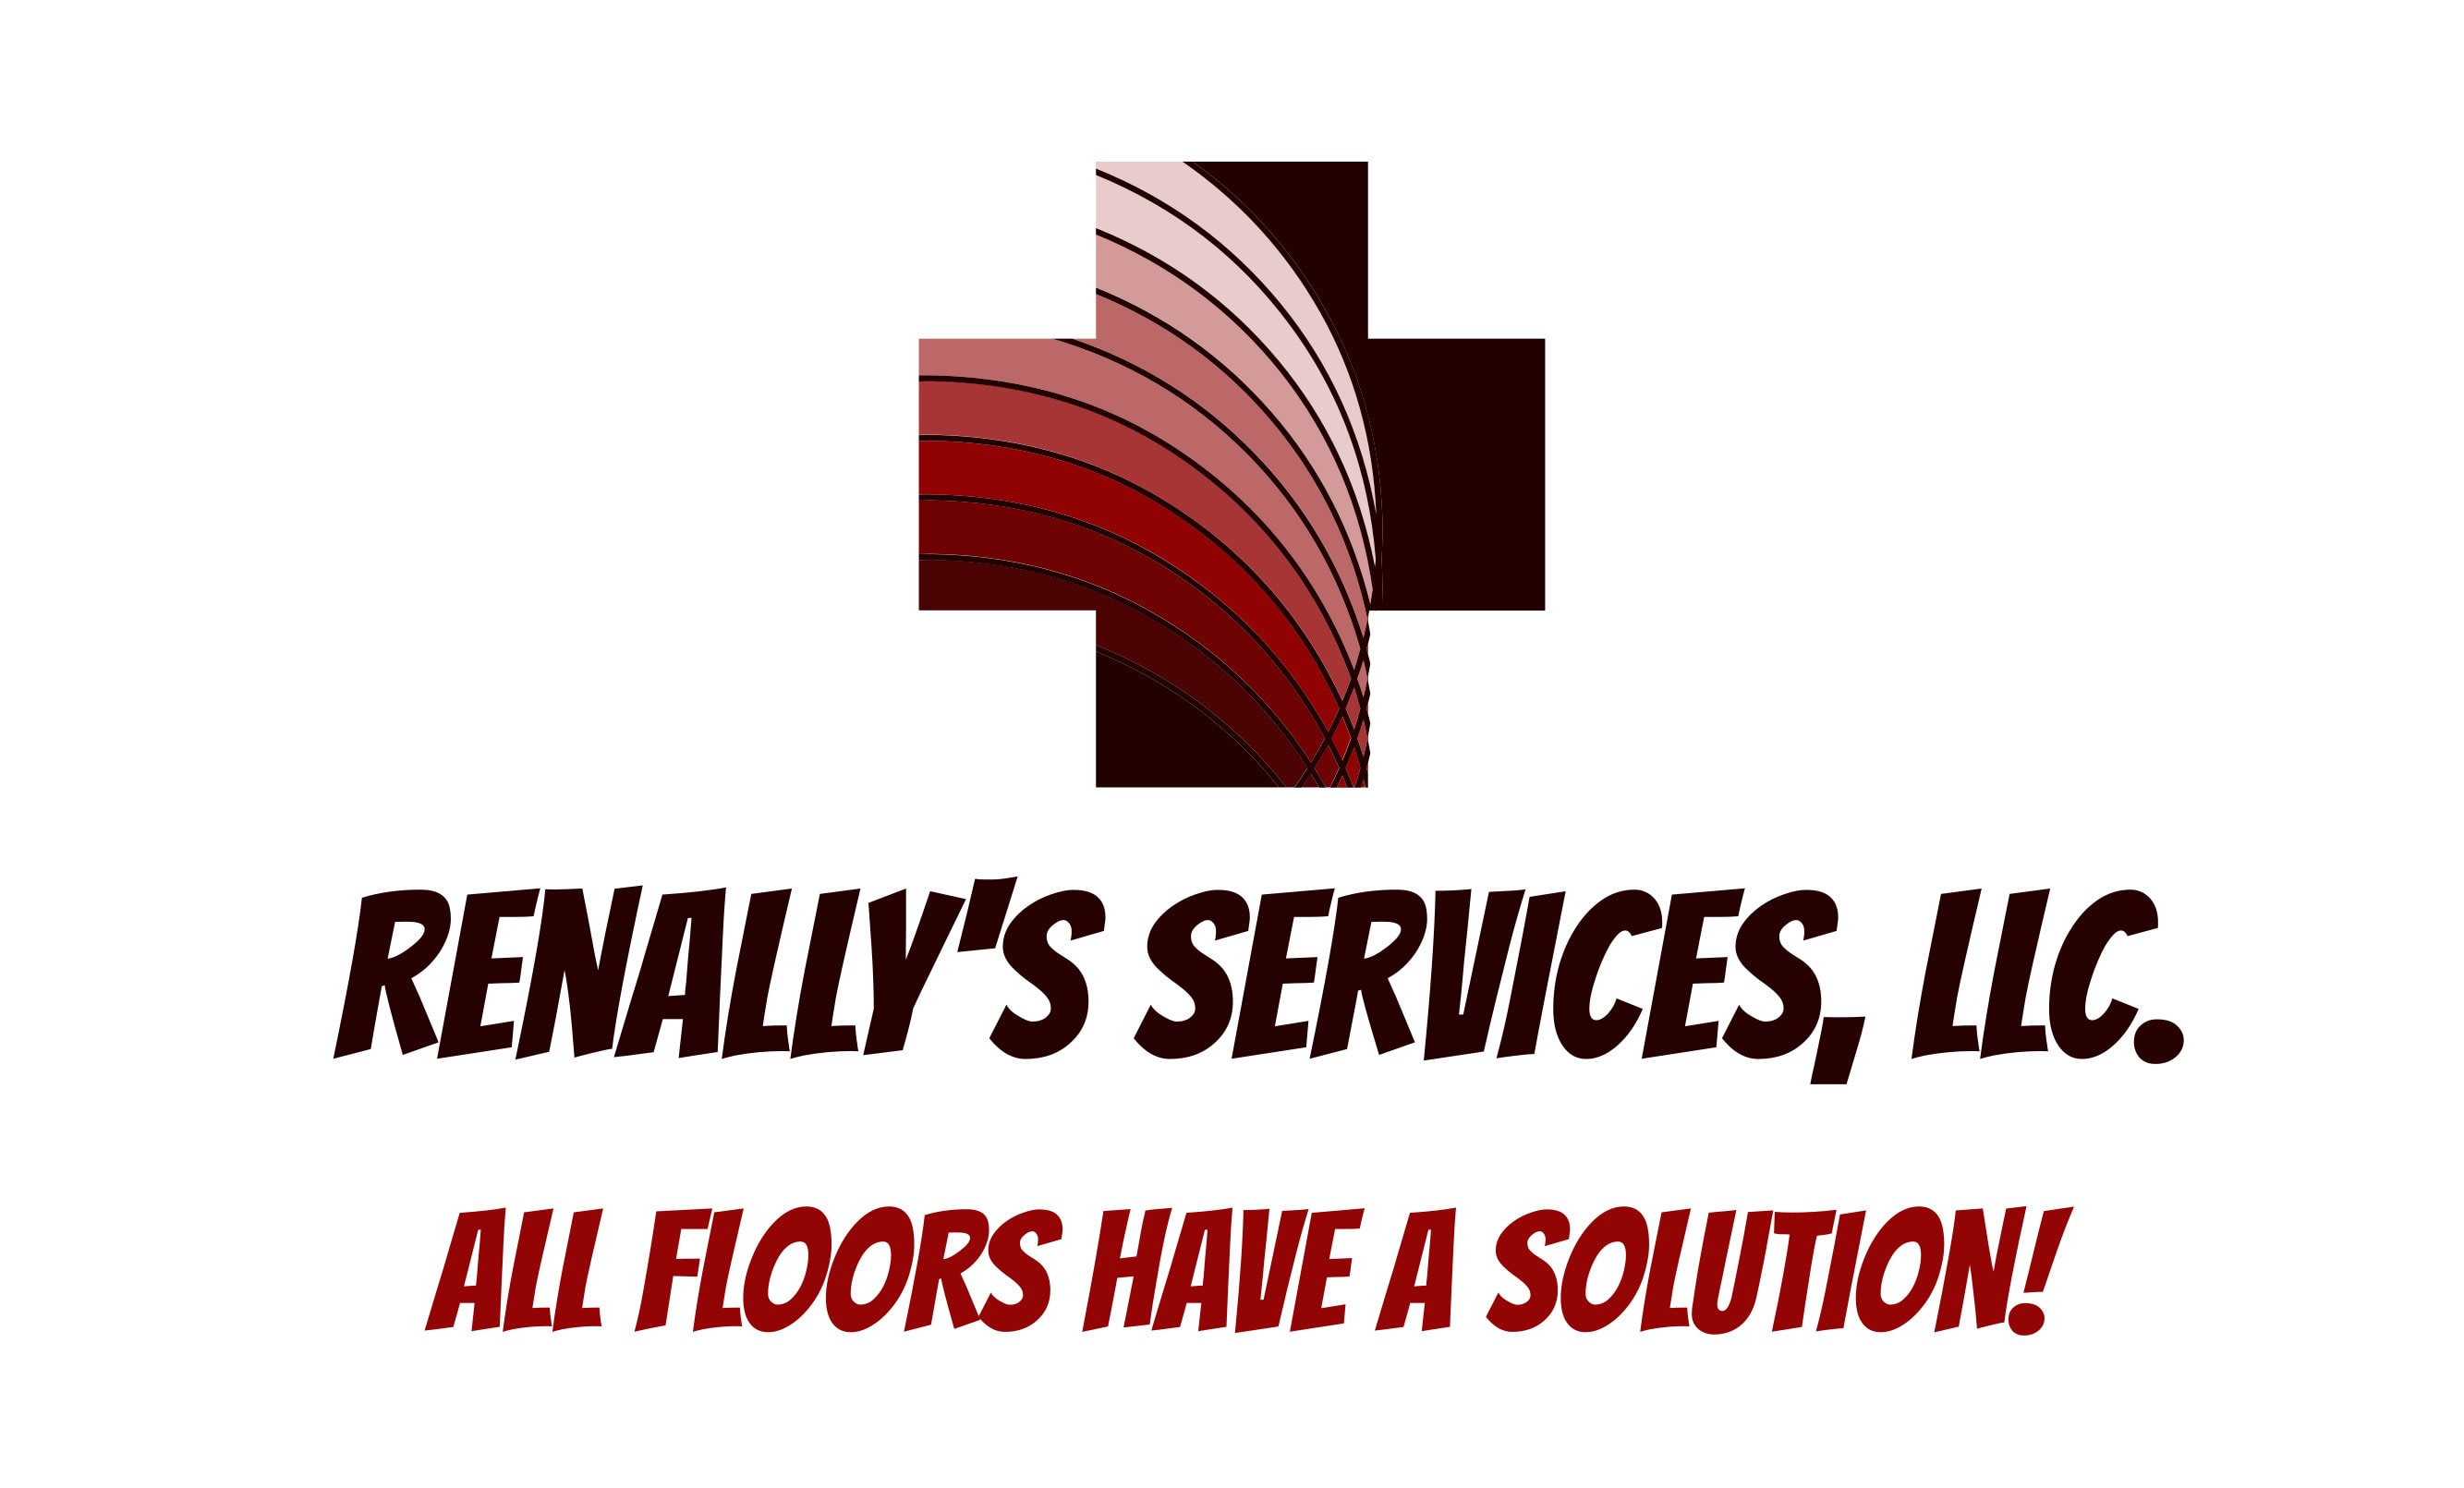 Renally's Services